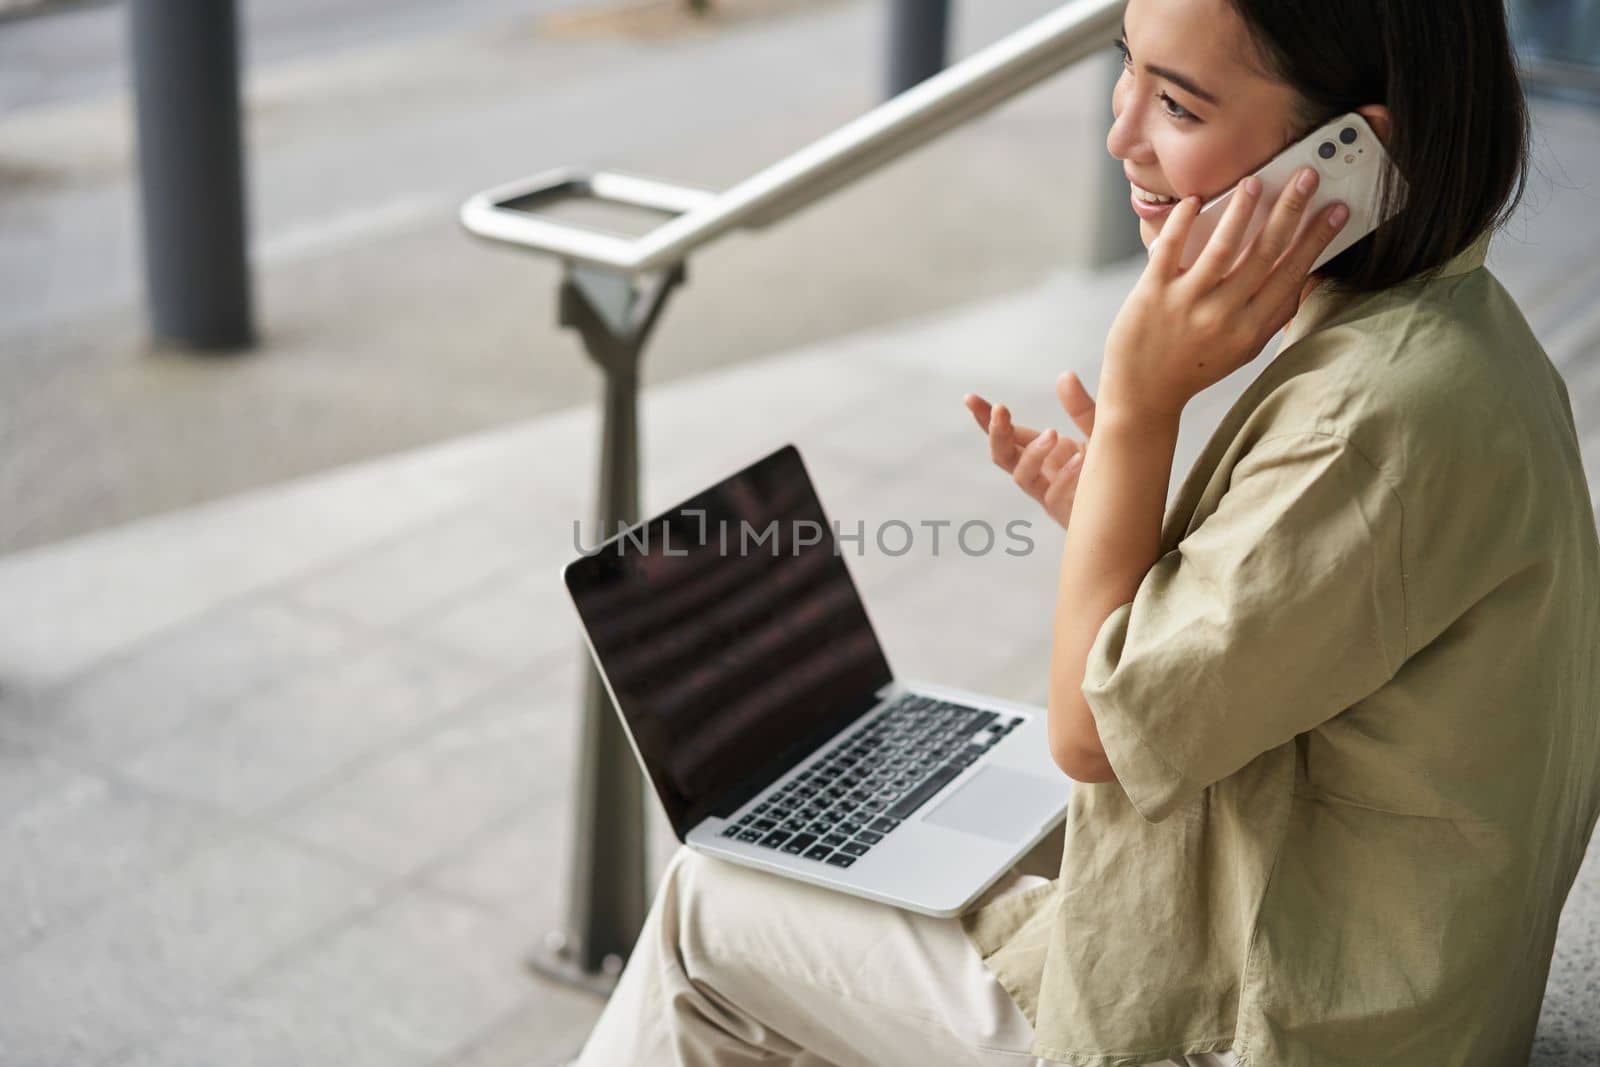 Smiling asian woman makes a phone call. Girl student using laptop and mobile phone, talking to someone on telephone.